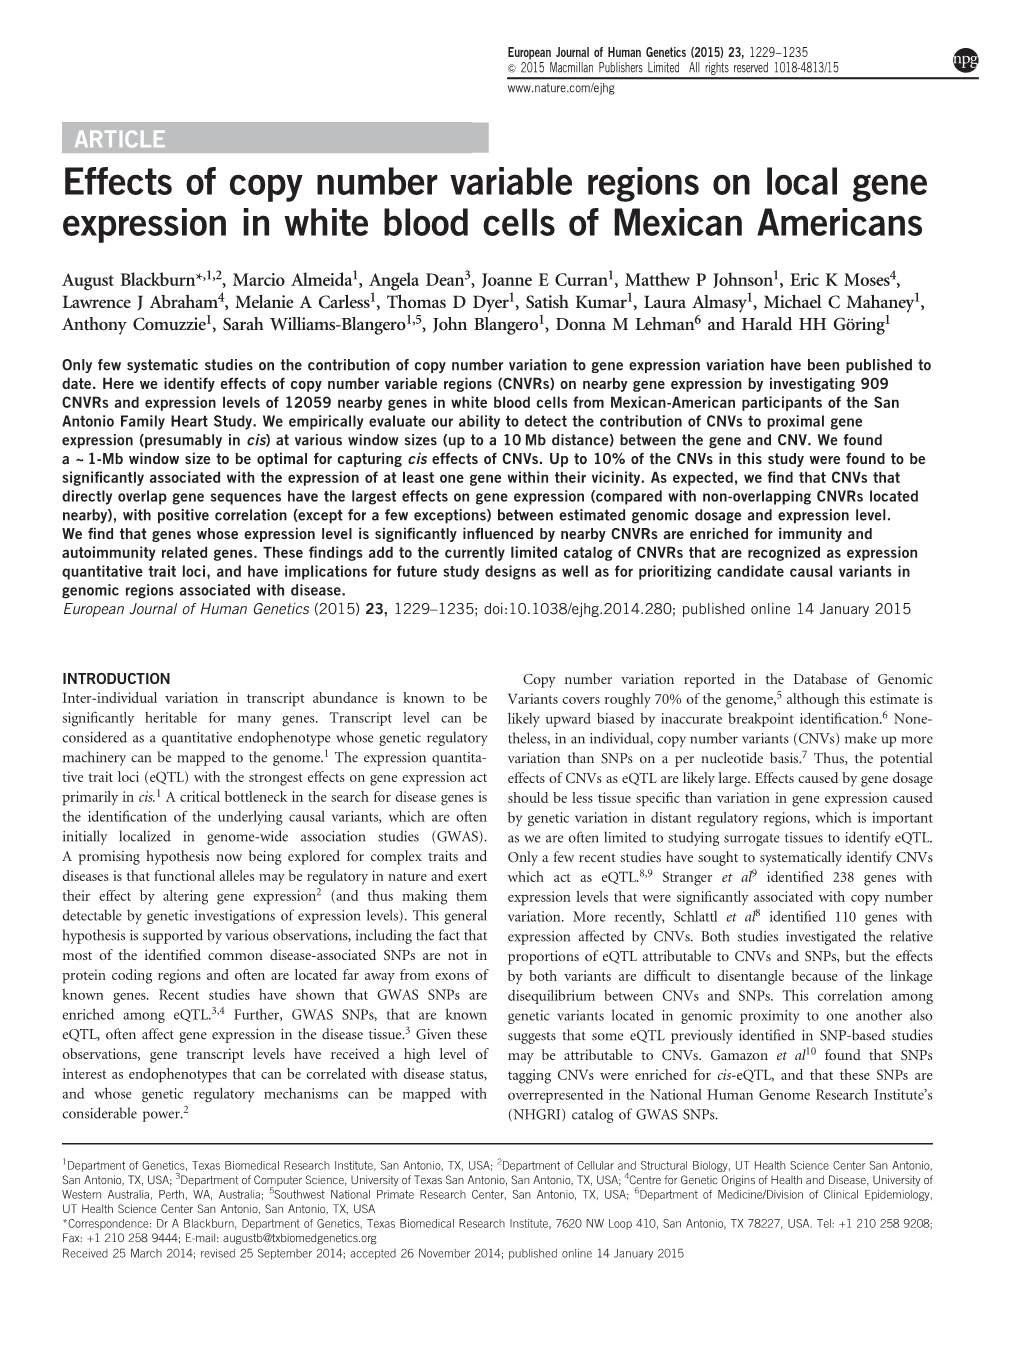 Effects of Copy Number Variable Regions on Local Gene Expression in White Blood Cells of Mexican Americans